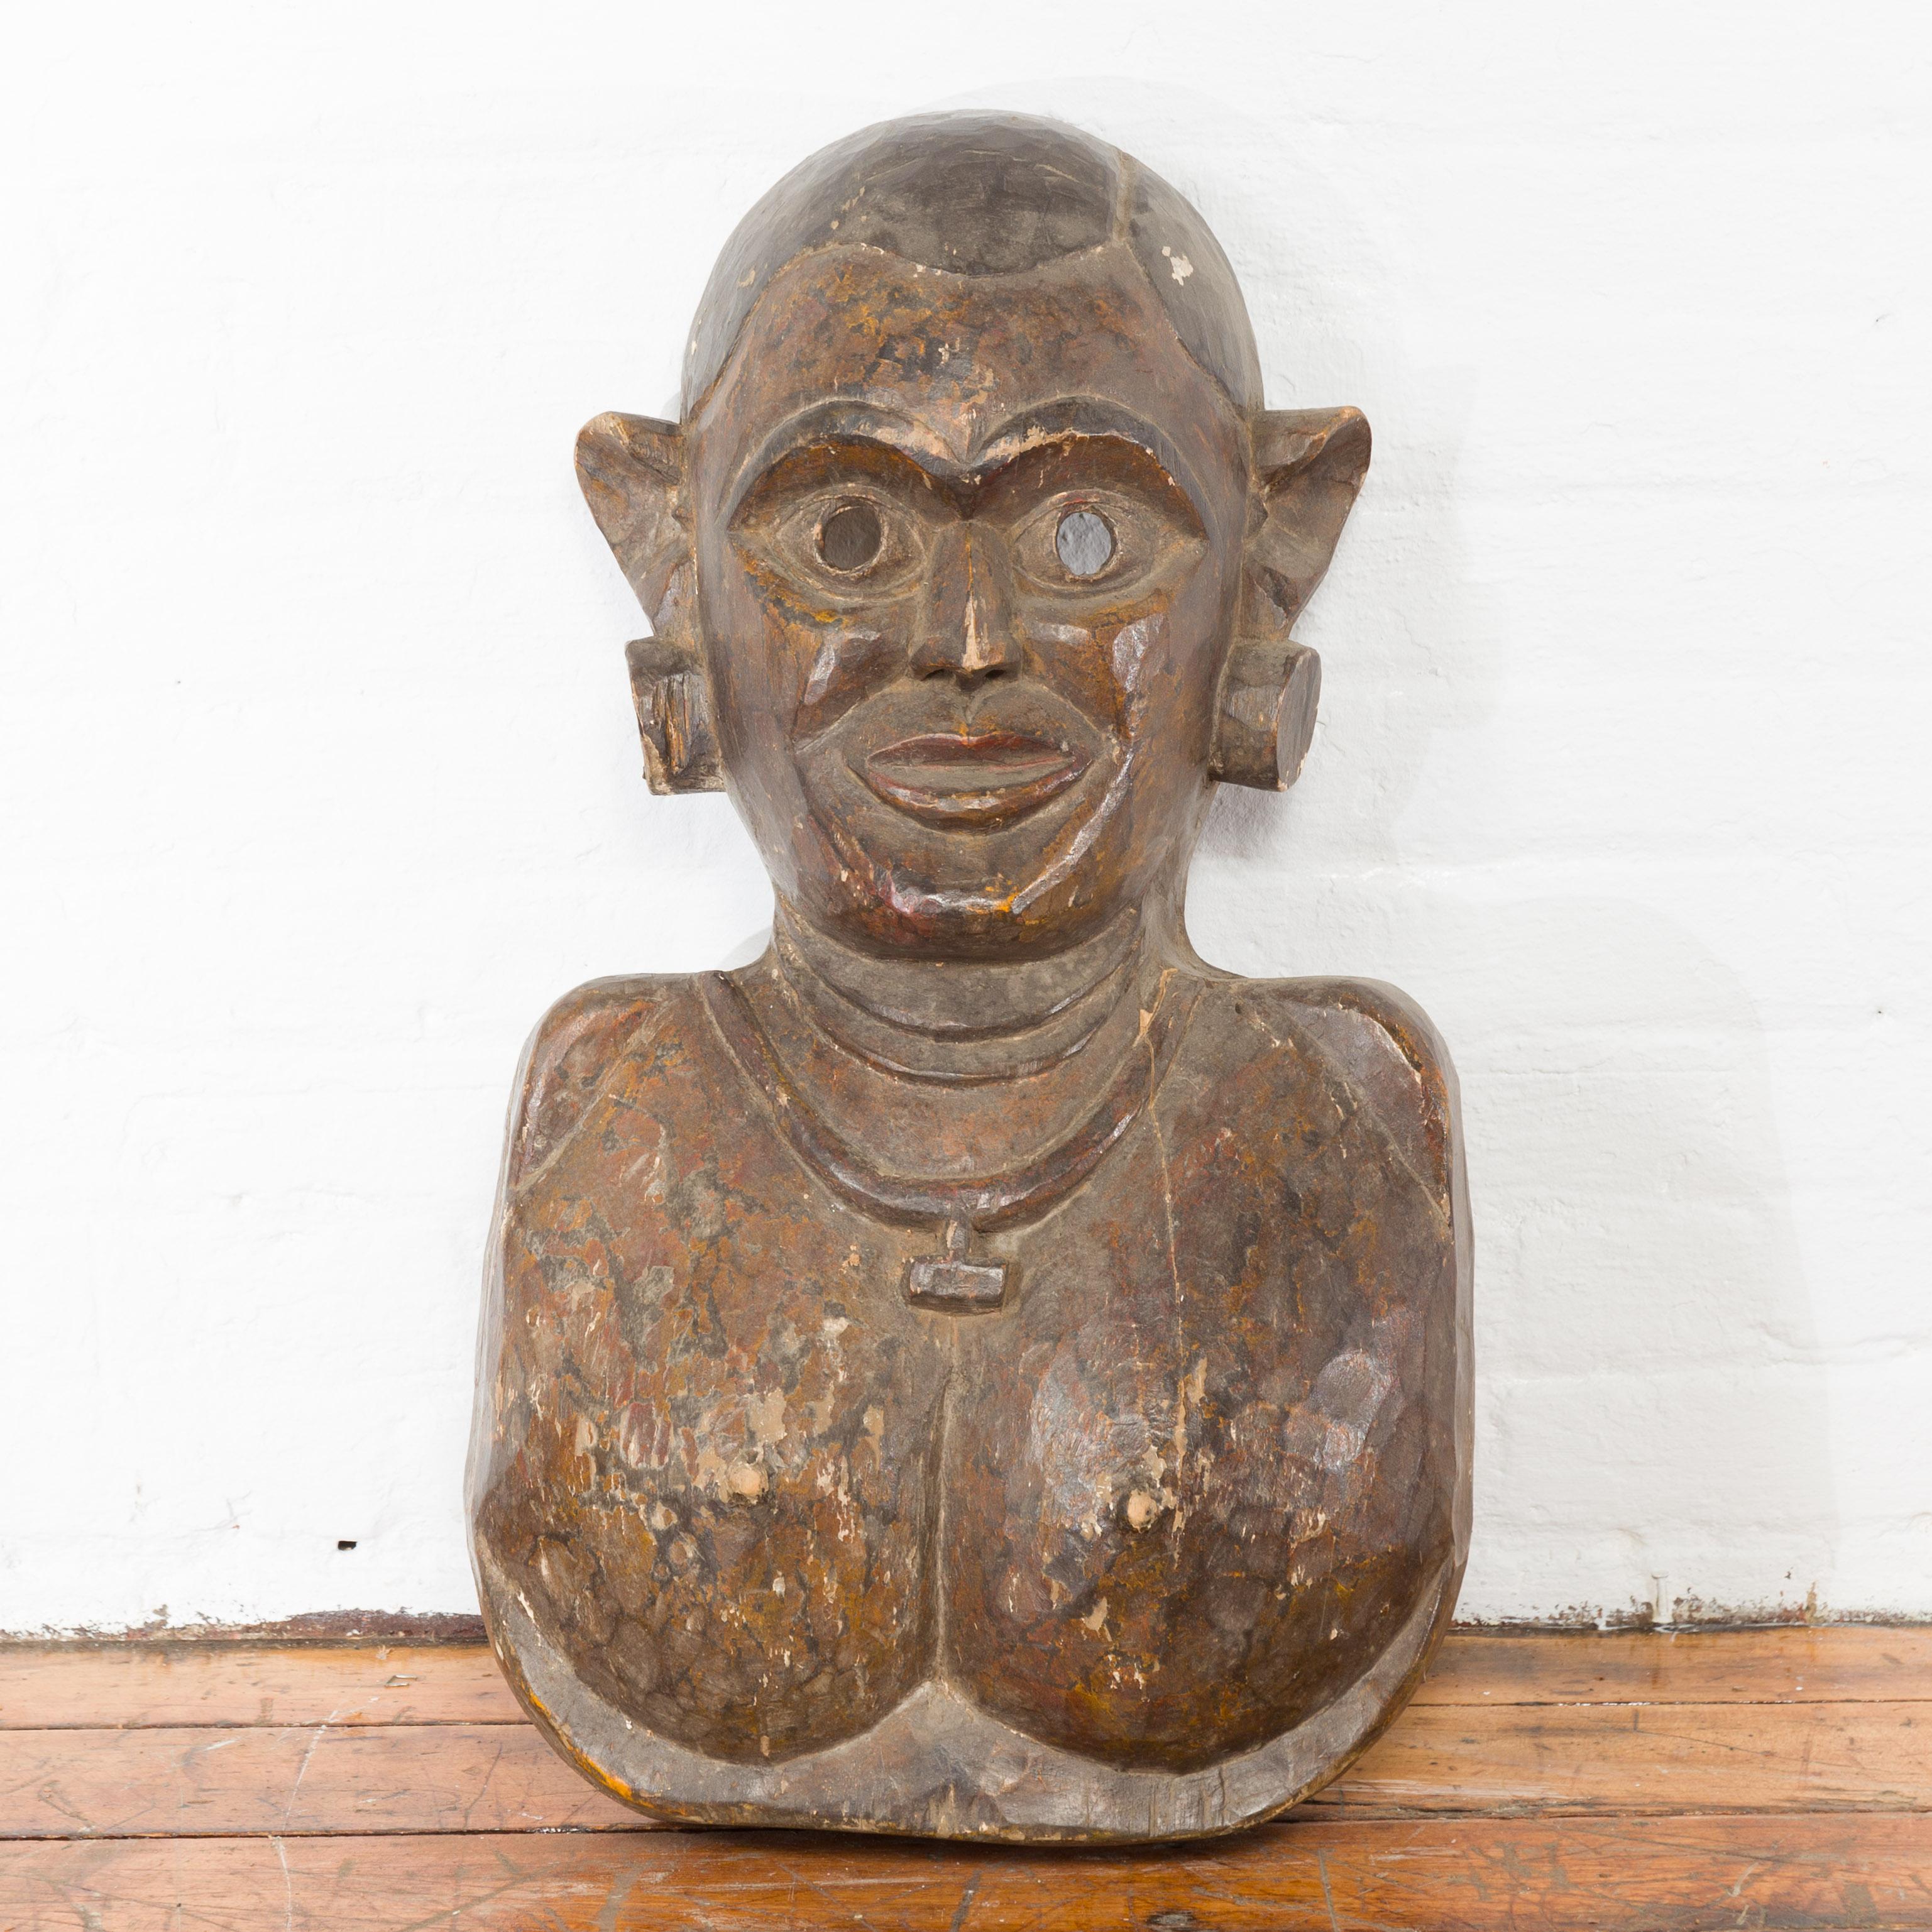 Our 19th century antique ceremonial wooden mask is from Jaipur, the capital of Rajasthan in India. The bust form mask features the woman from chest up with large earrings and necklace while her ears protrude from the sides of the antique wooden